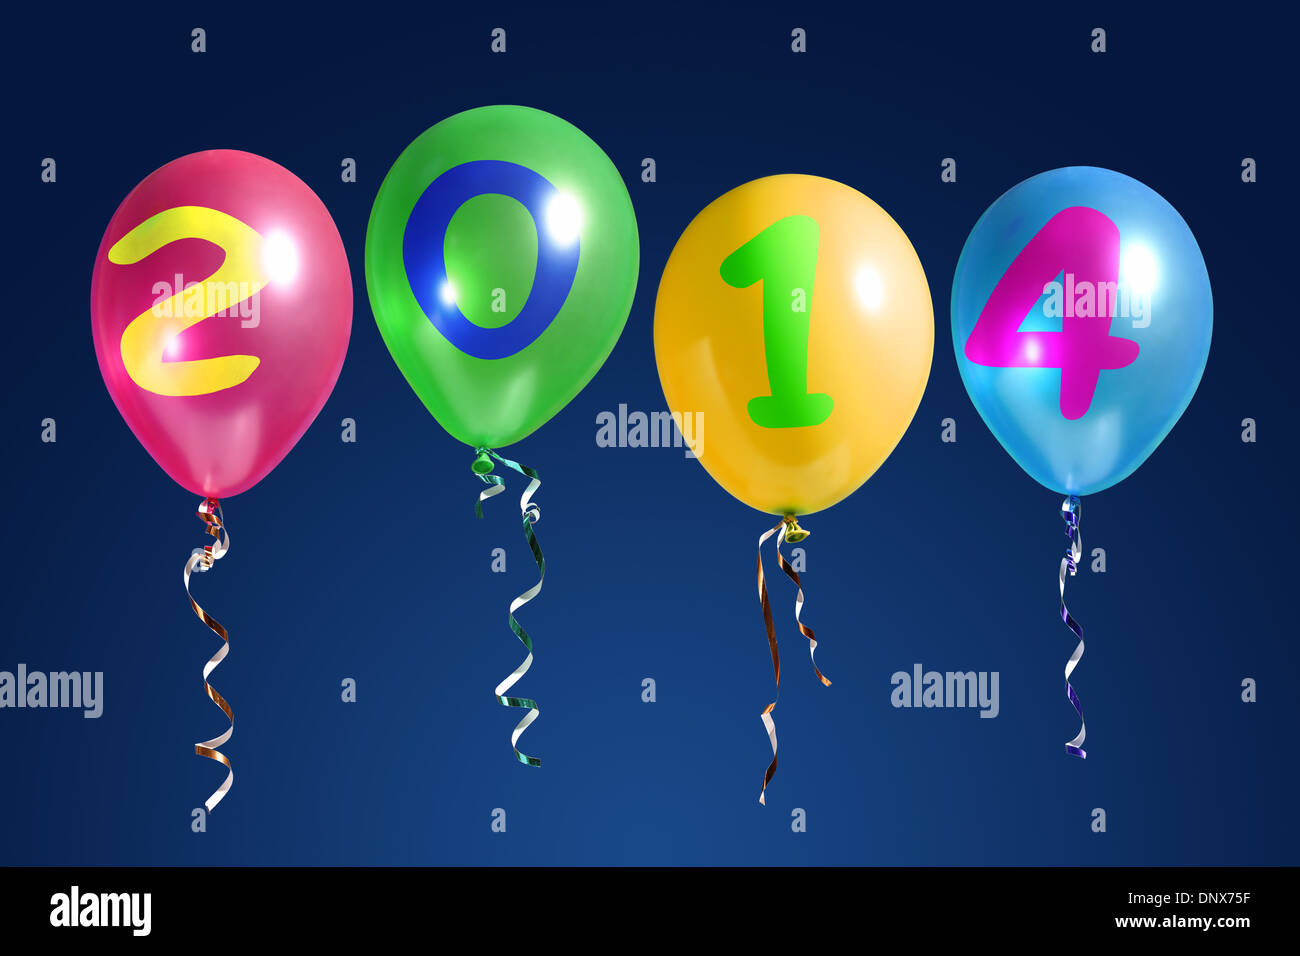 Four colorful balloons with 2014 New Year digits over dark blue background Stock Photo